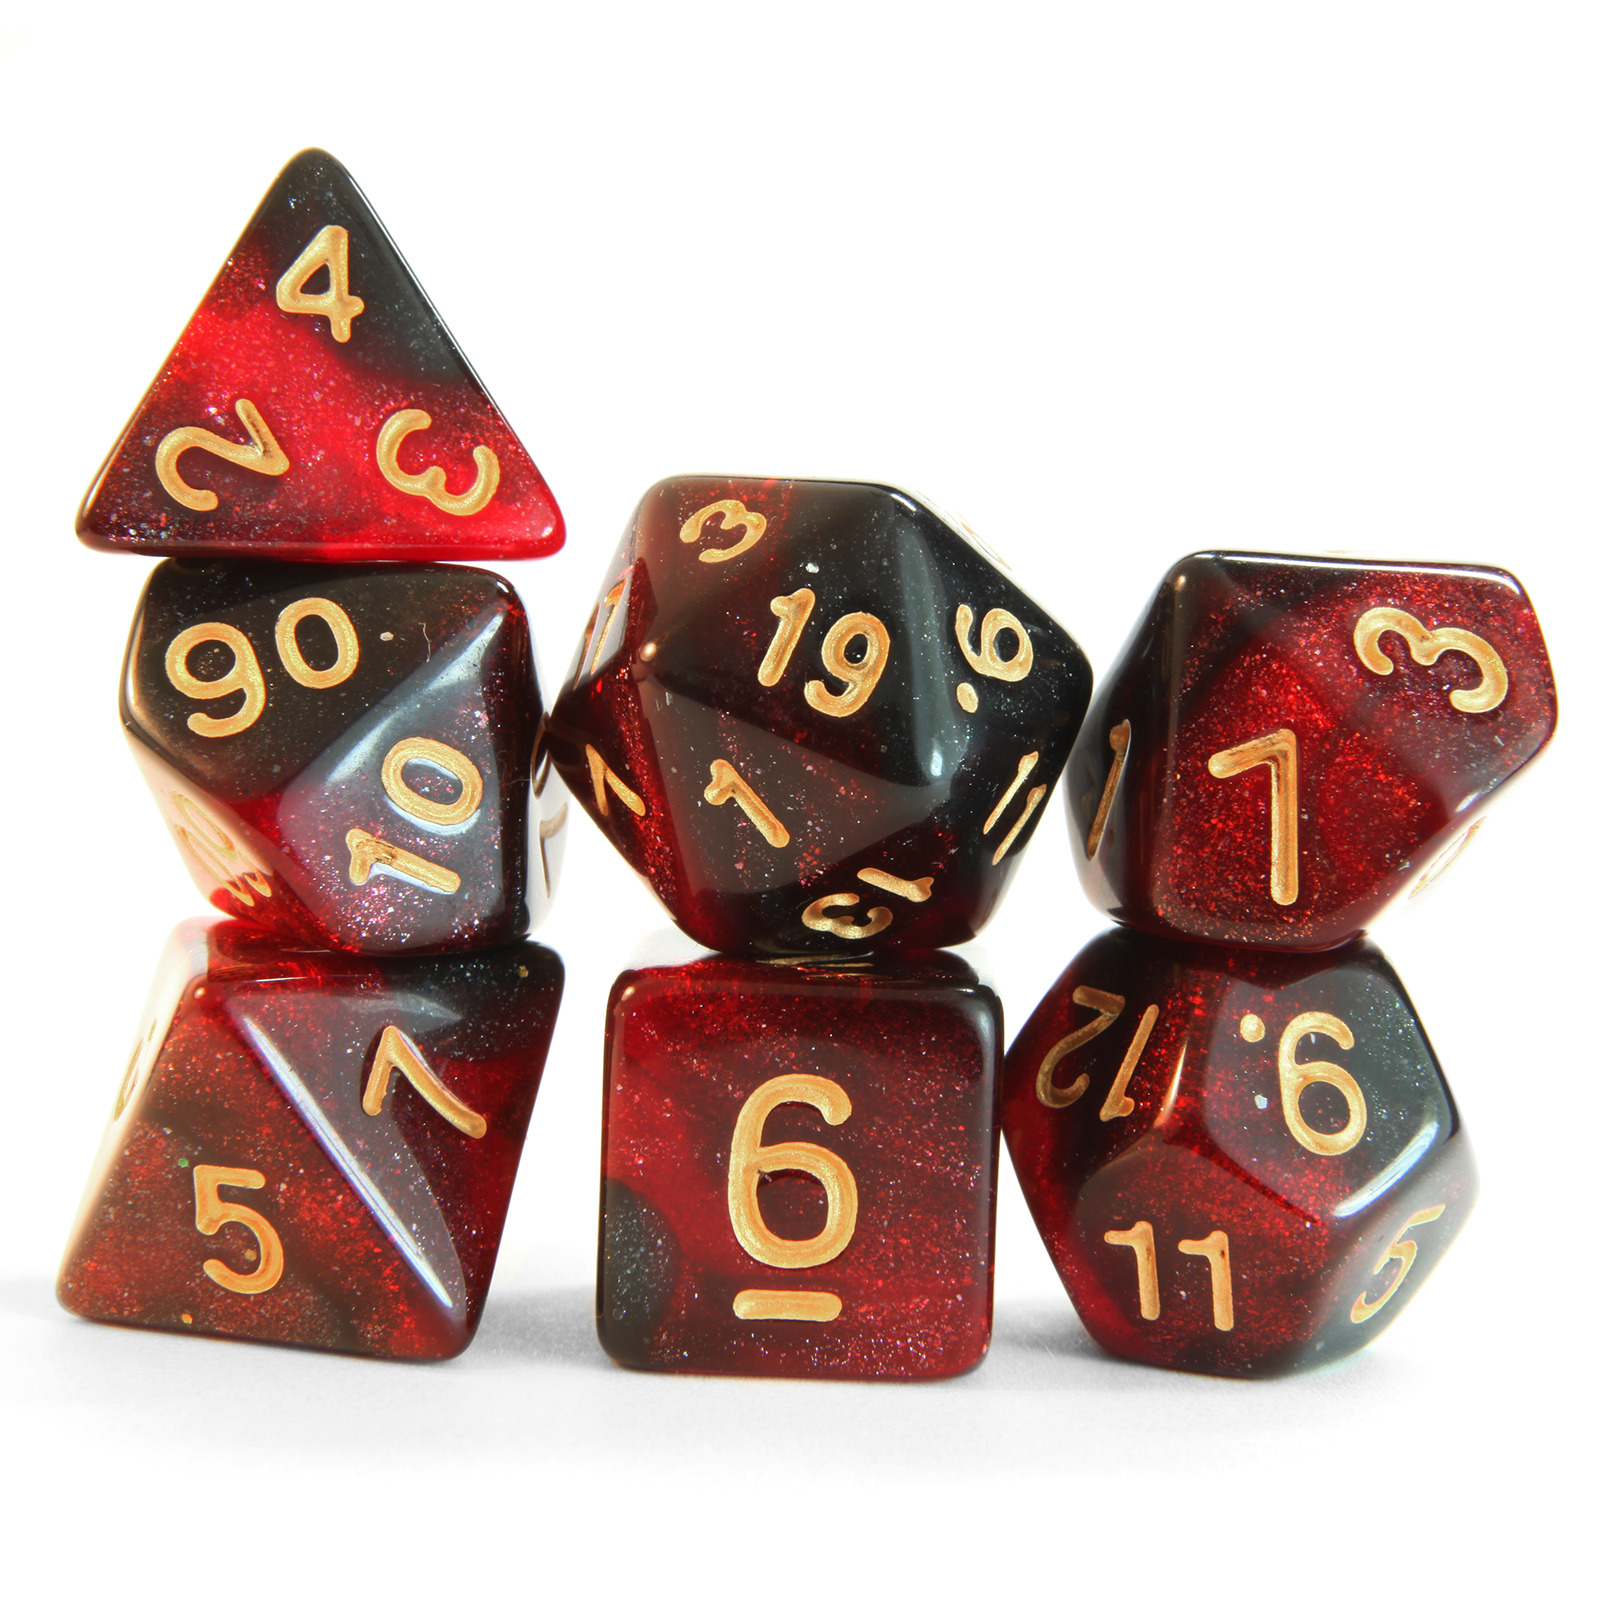 Stonehaven Dice Set Polyhedral Dice (7pcs) Red And Black Swirl